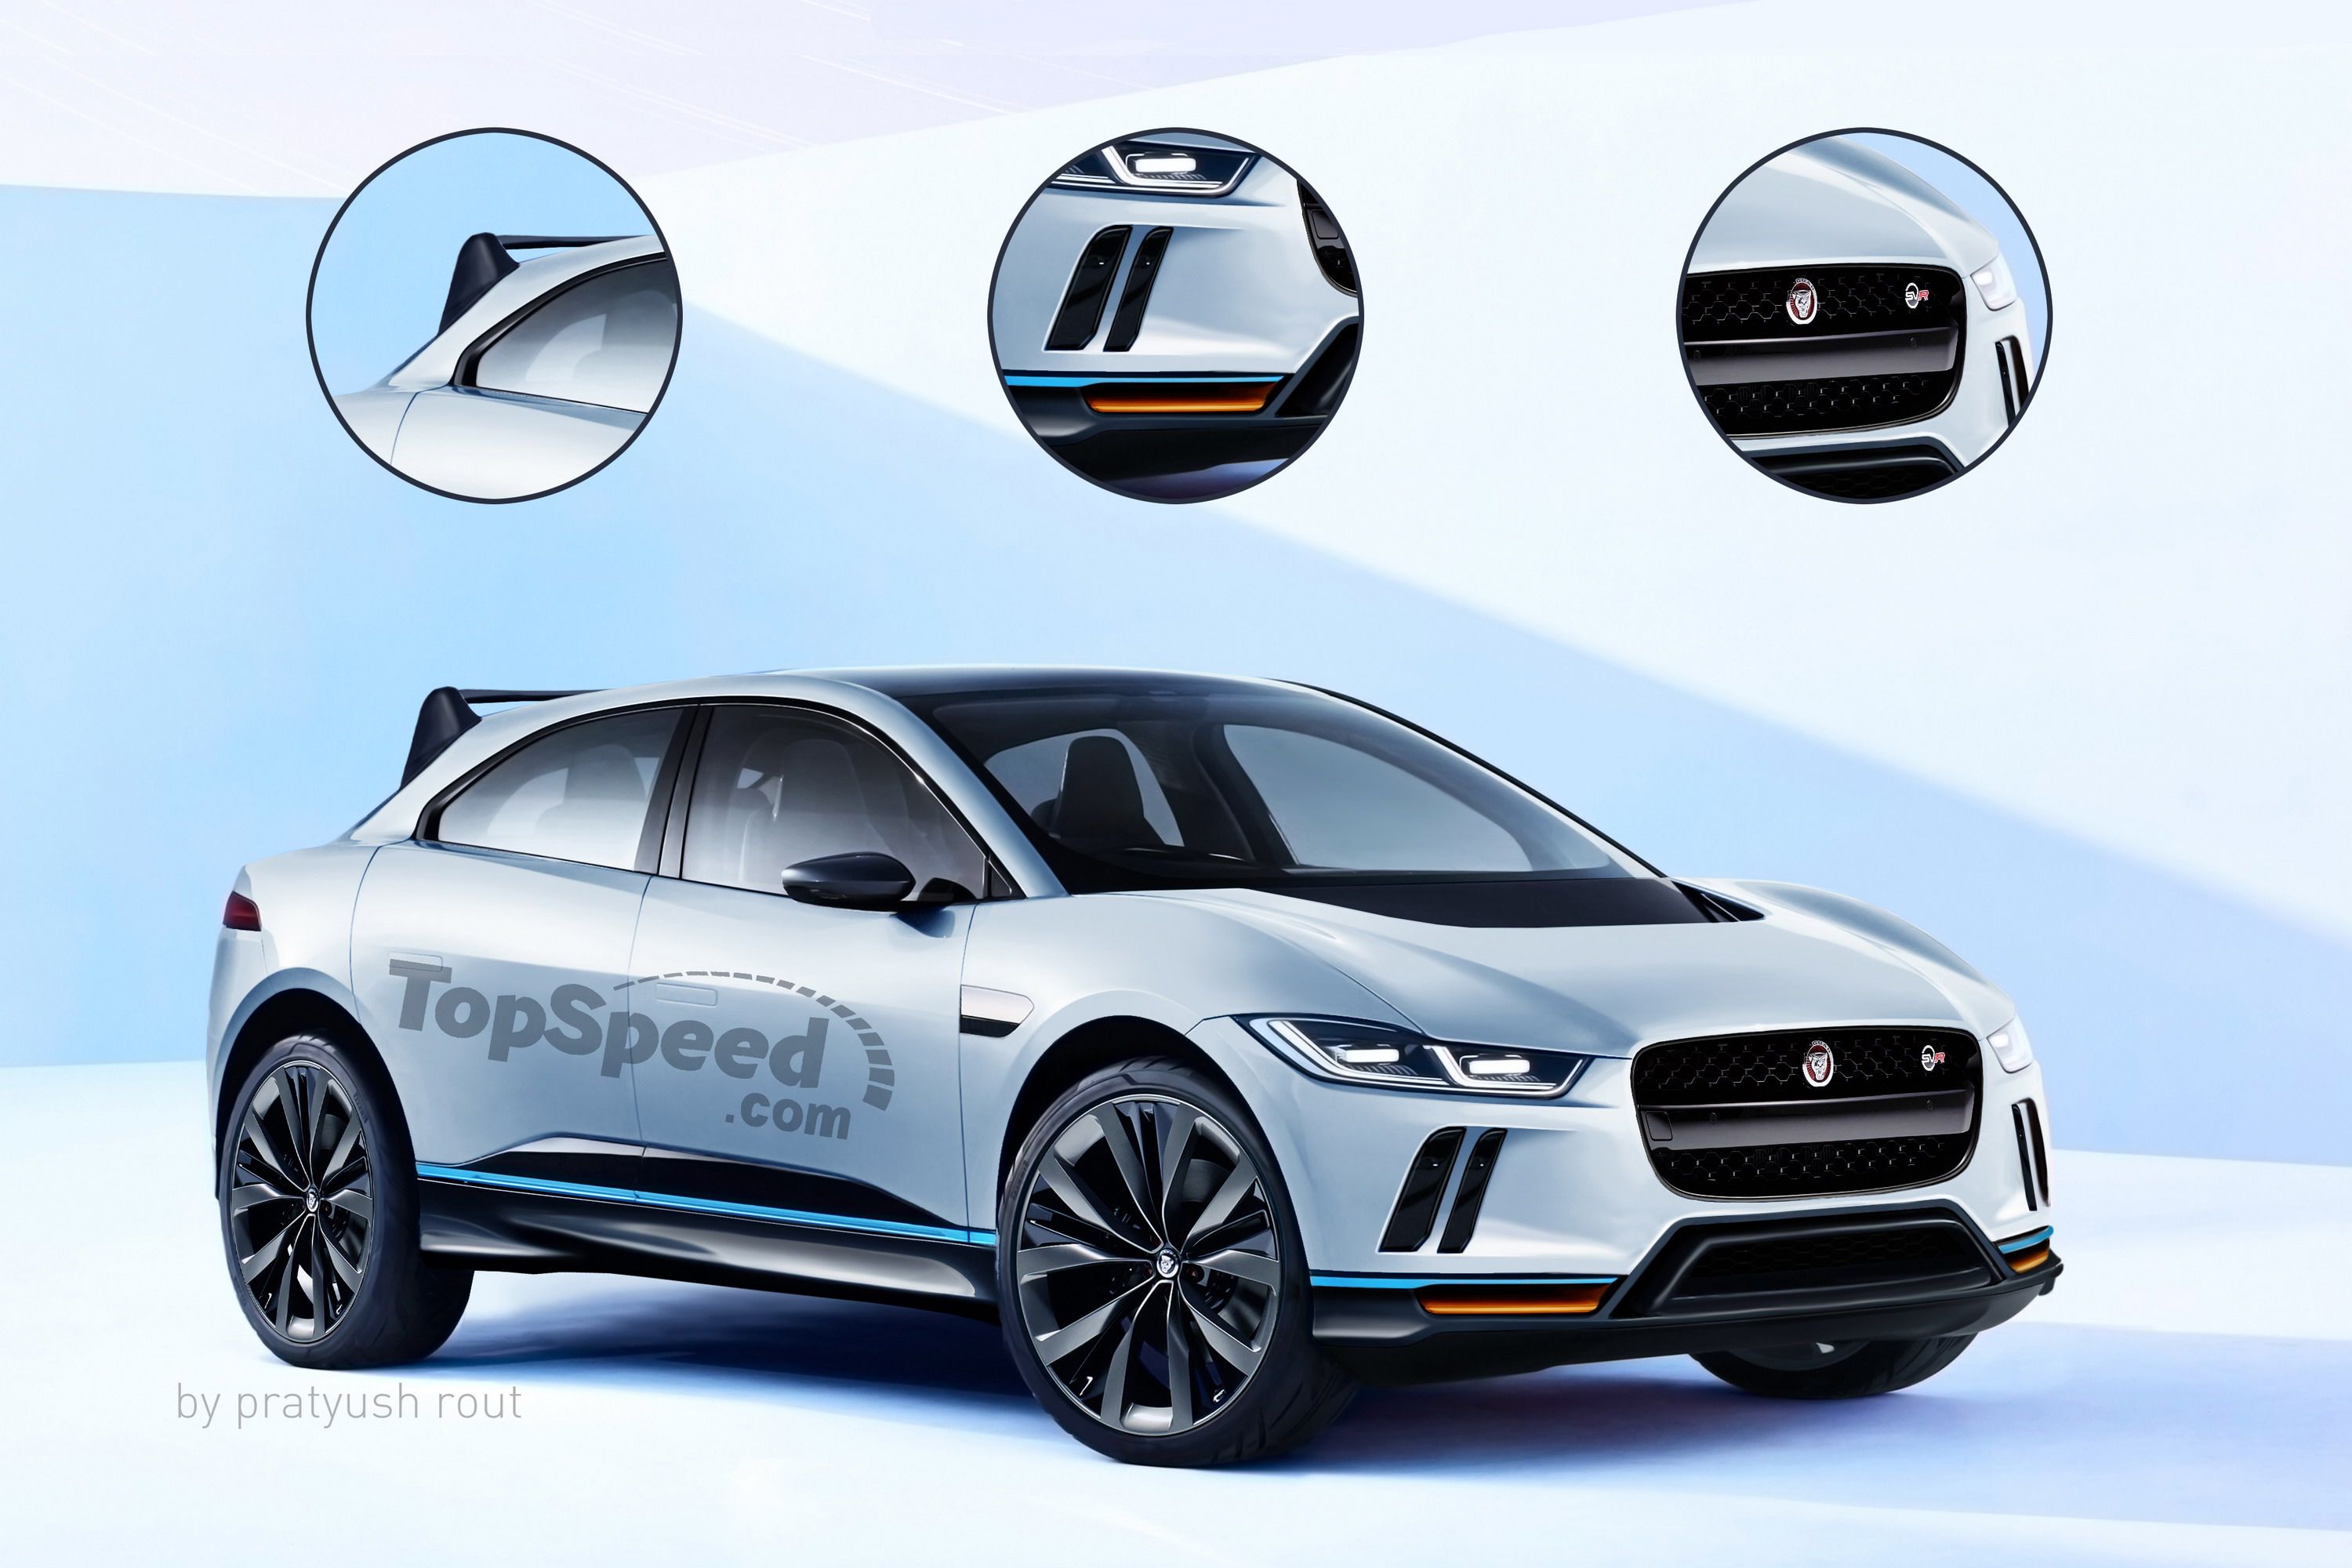 2018 Jaguar Contemplates I-Pace SVR Tuning and Training-Based Performance Restrictions